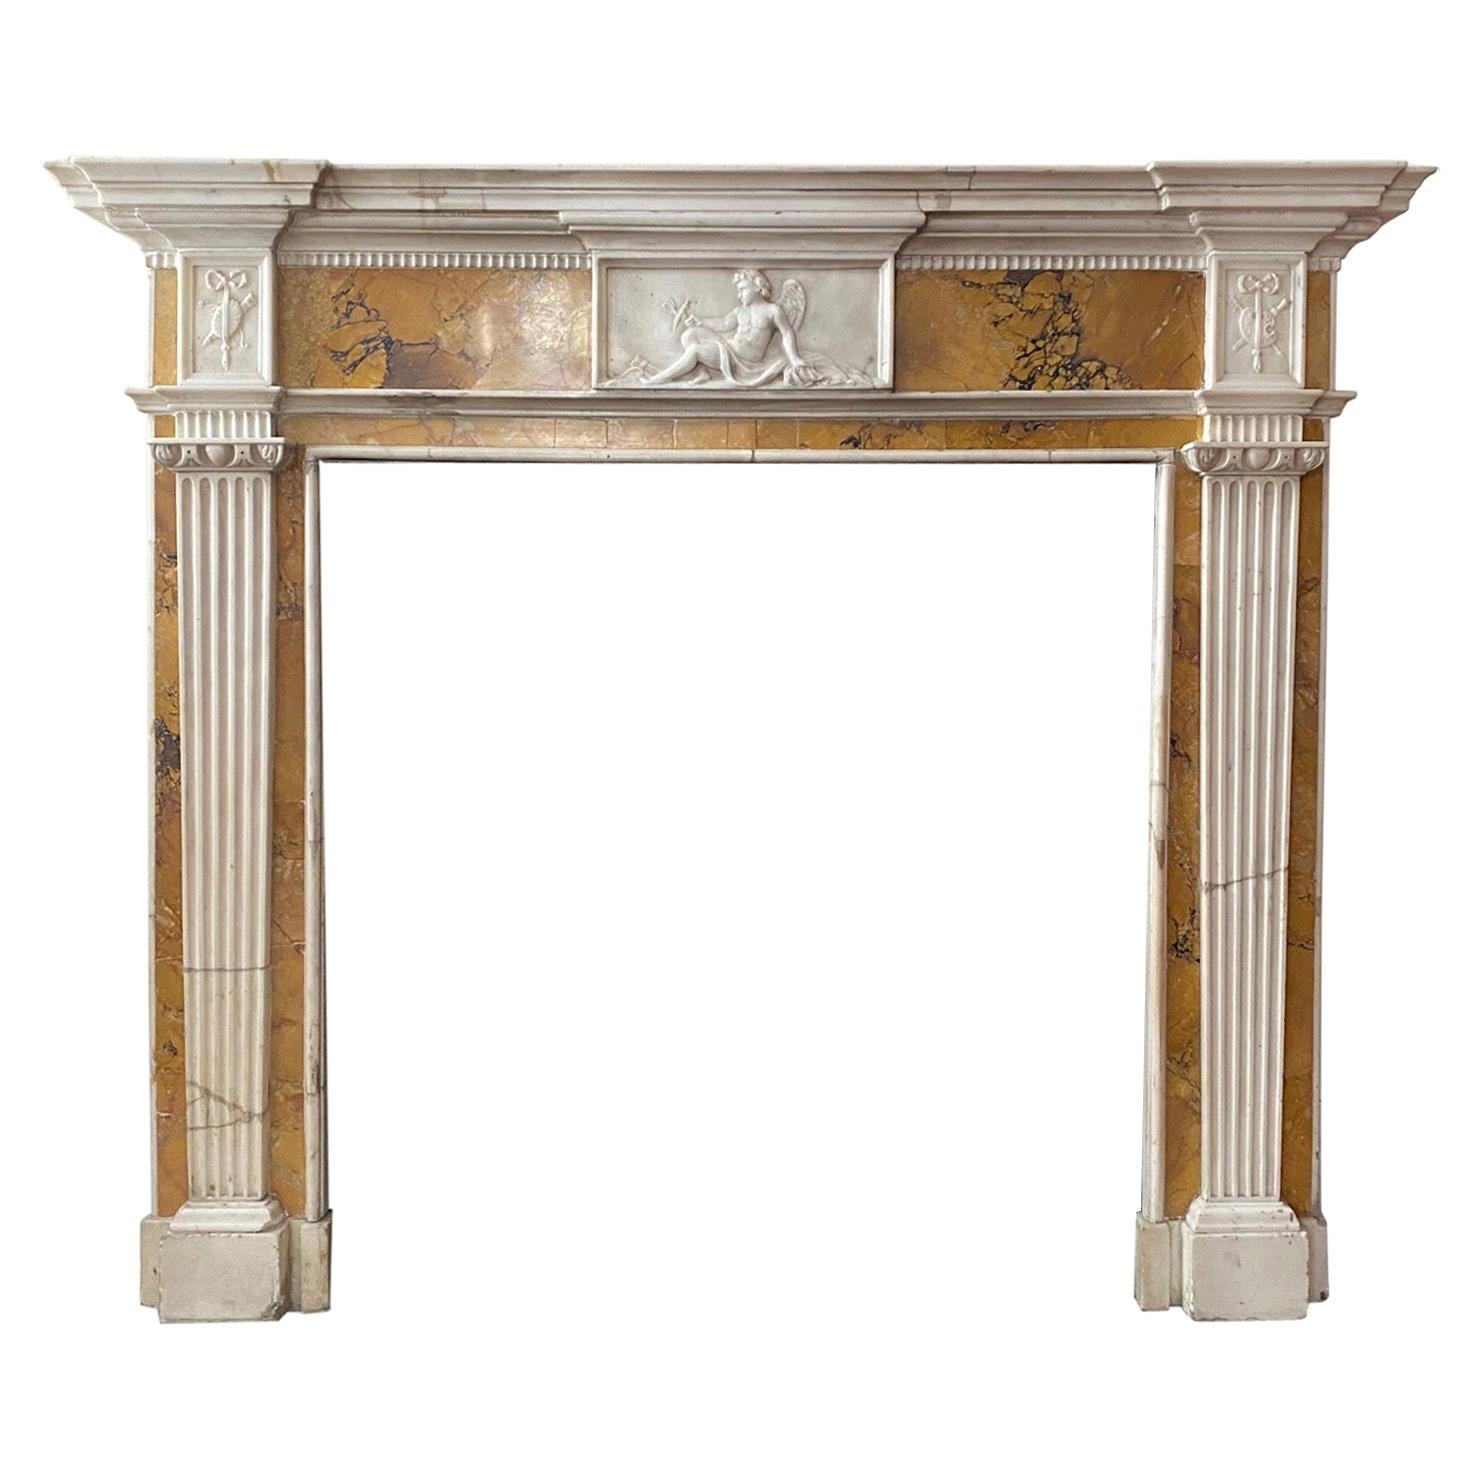 Fine Neo Classical Georgian Period White Statuary and Siena Marble Mantel For Sale